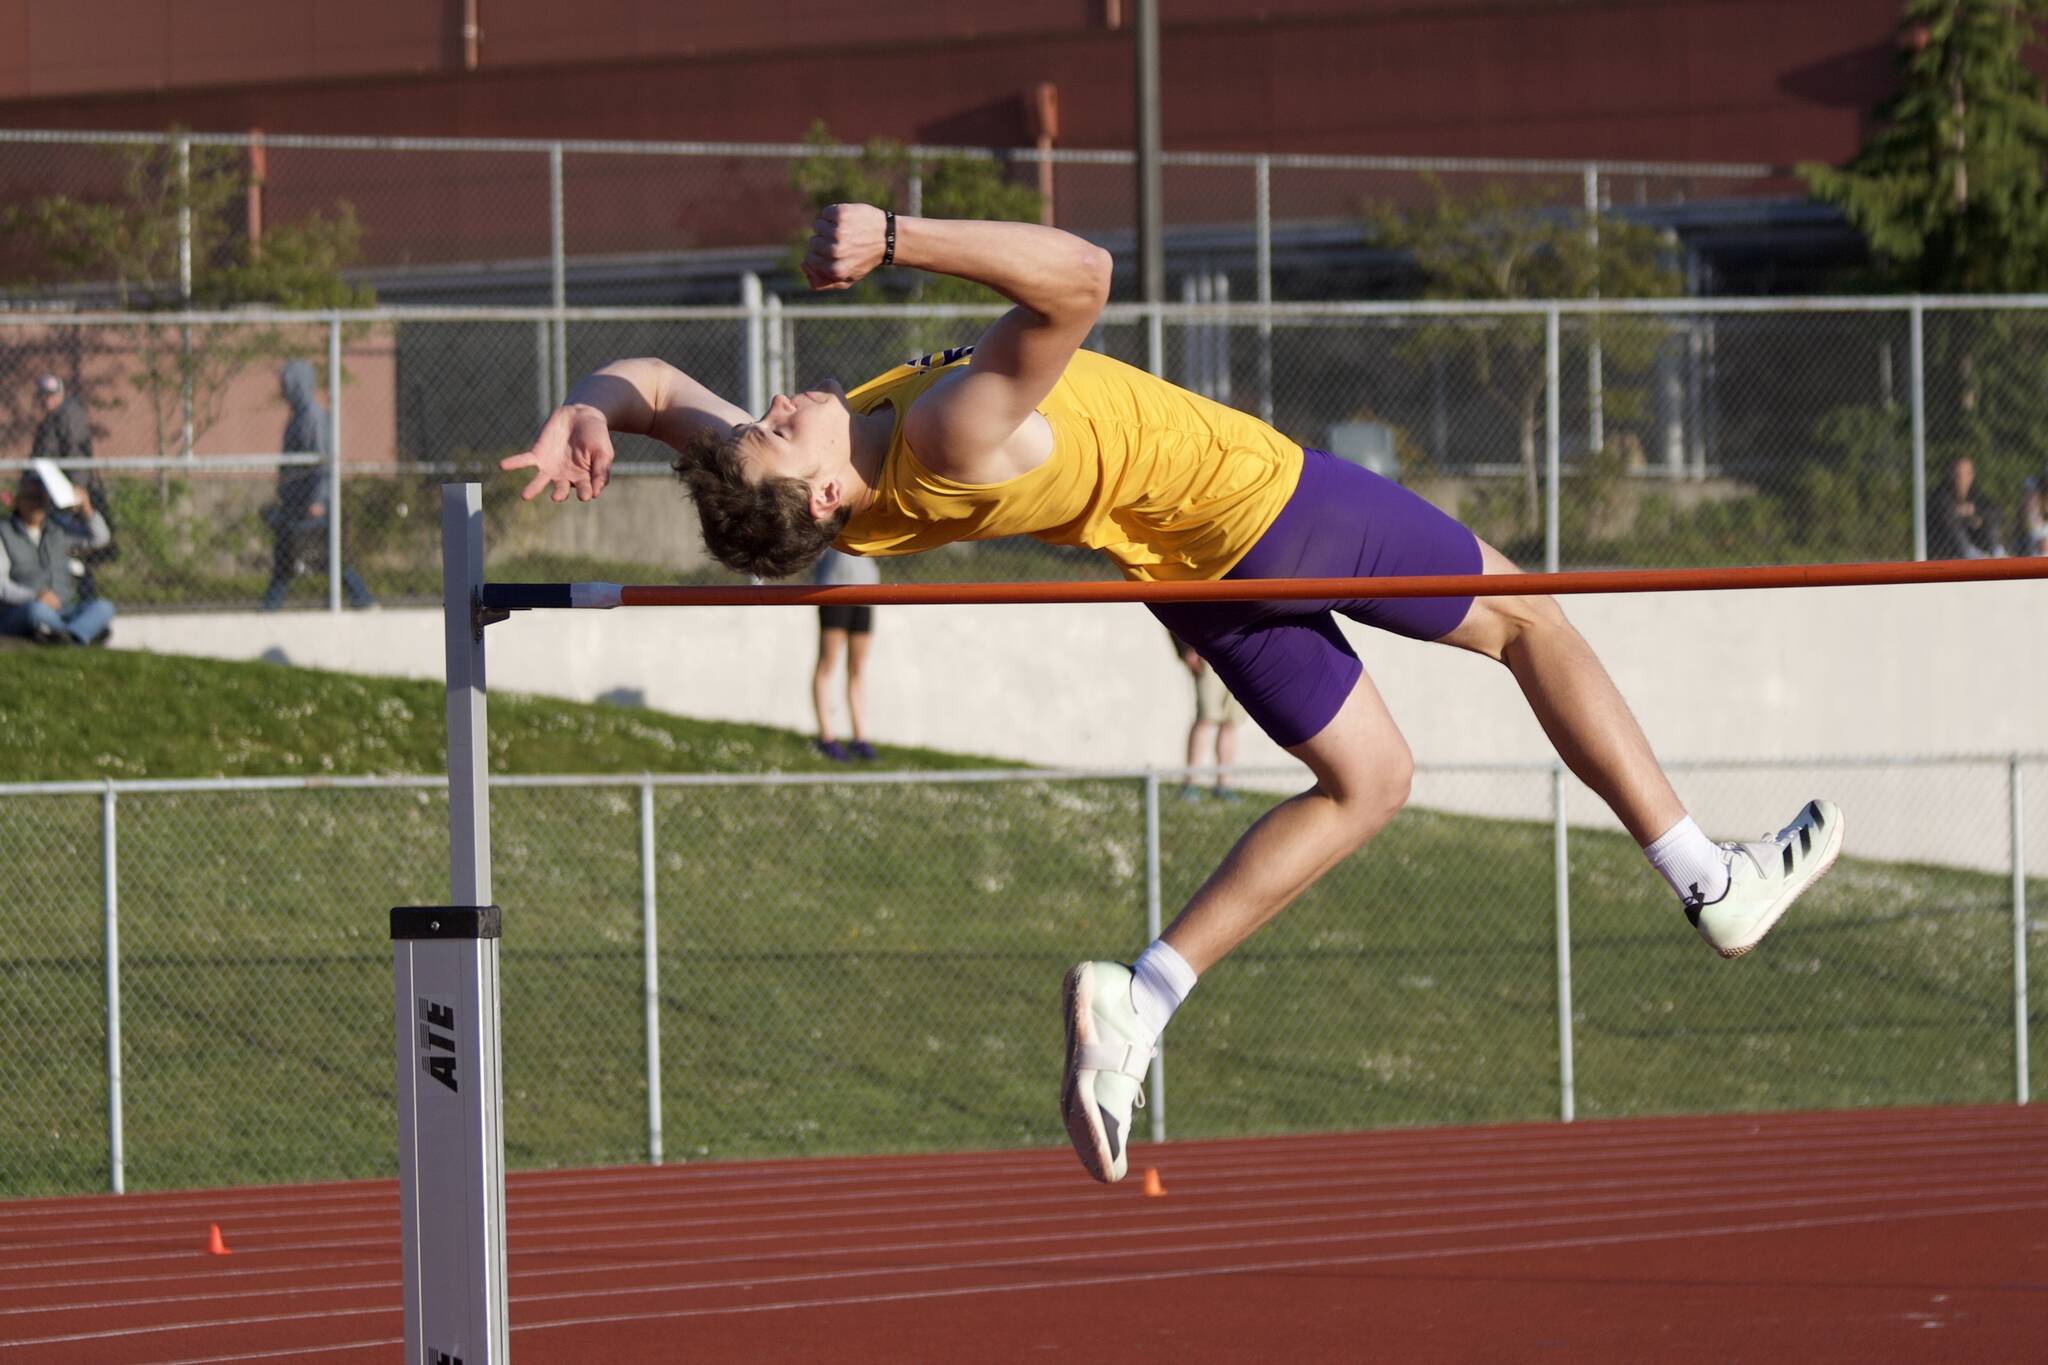 Lake Stevens junior Teagan Lawson arches his body over the high jump bar on the first day of the Wesco 4A League Championship on Wednesday at Snohomish High School. Lawson claimed the league title after clearing a 6-foot, 6-inch bar. (Taras McCurdie / The Herald)